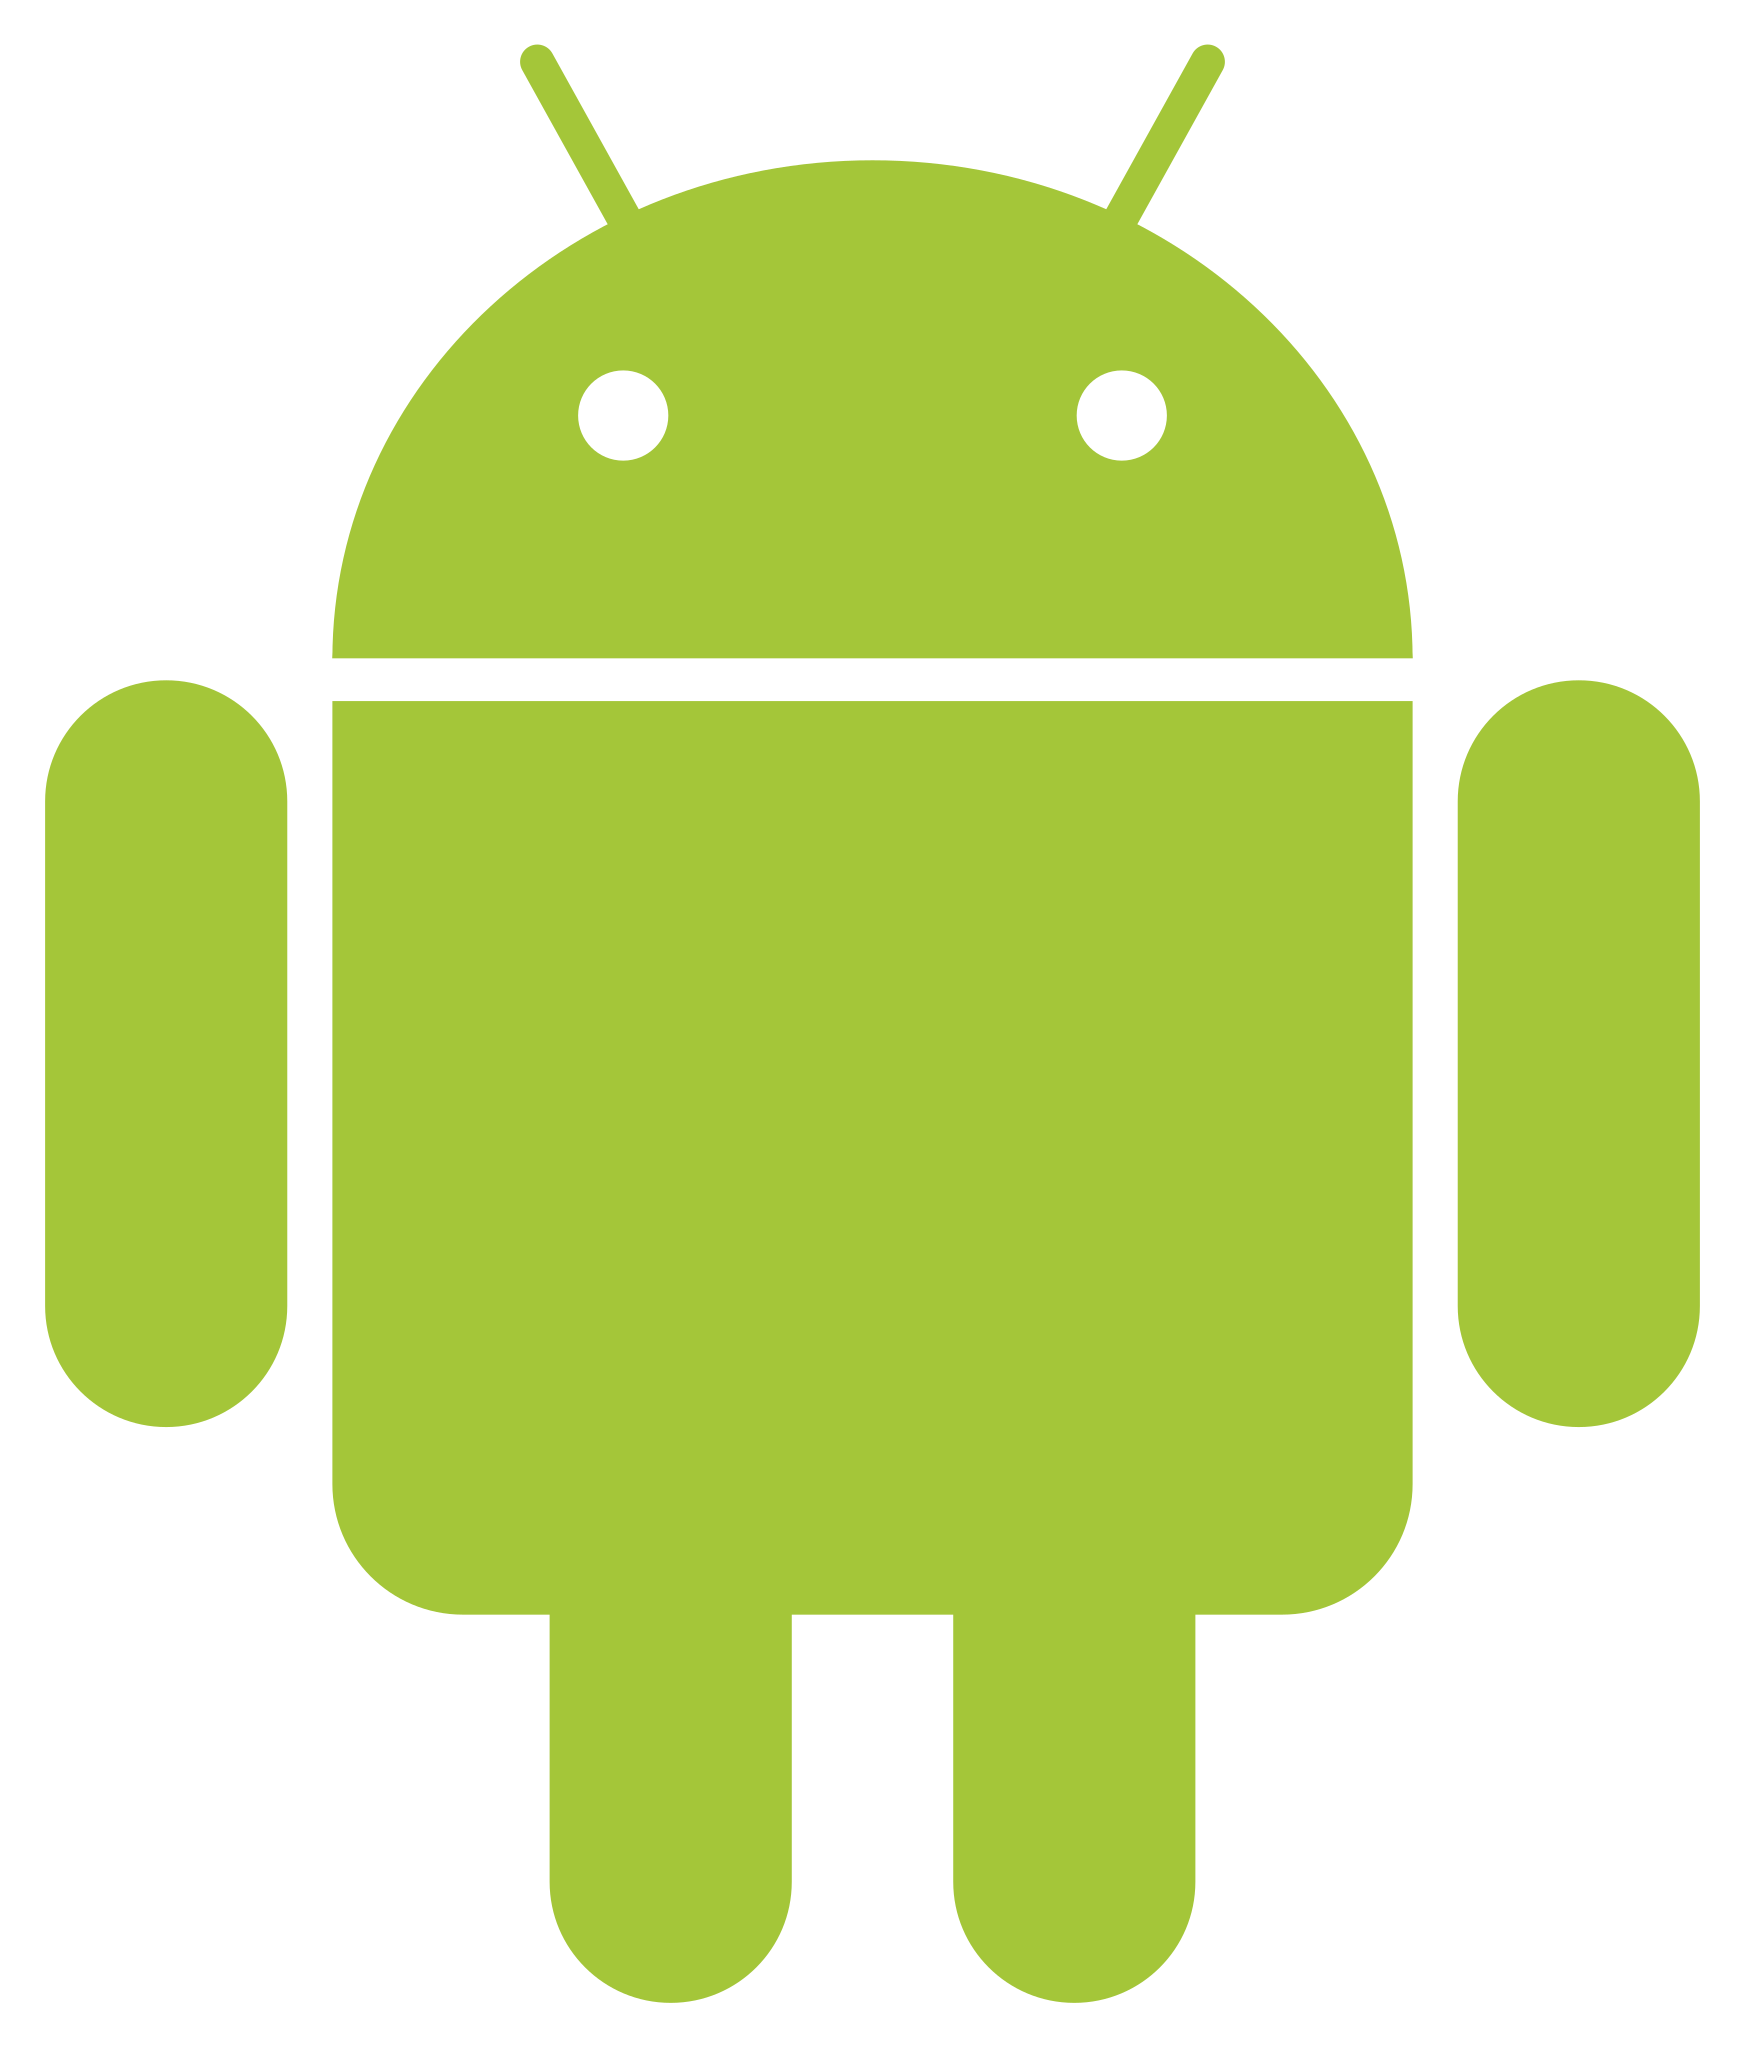 ANDROID APK PACKAGE PACKAGES